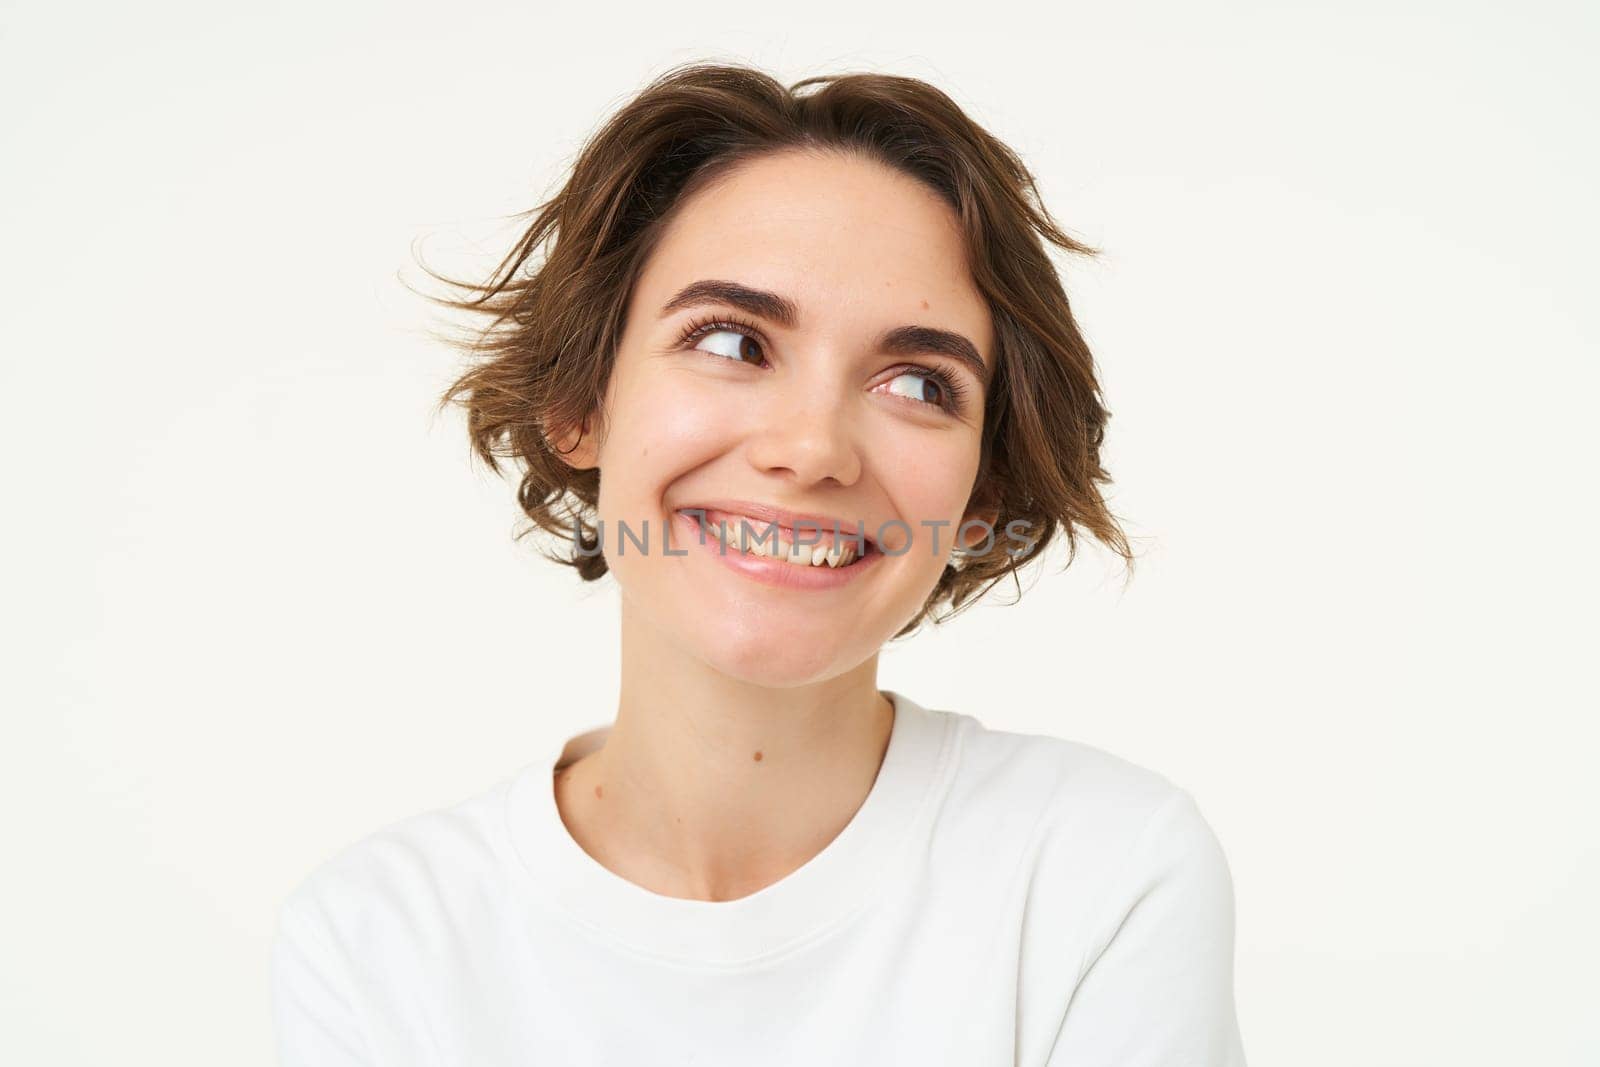 Close up portrait of brunette girl with short haircut, smiling and looking happy, posing over white background.